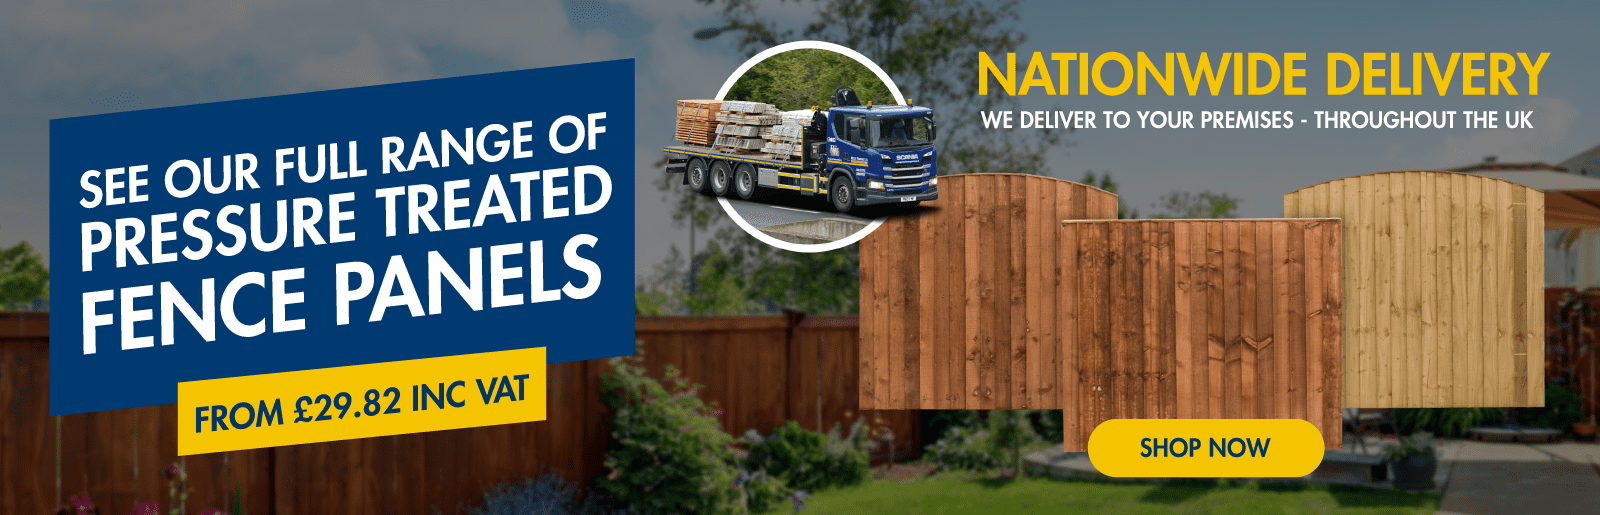 Garden Fence Panels Fencing Supplies and Concrete Posts Buy Online